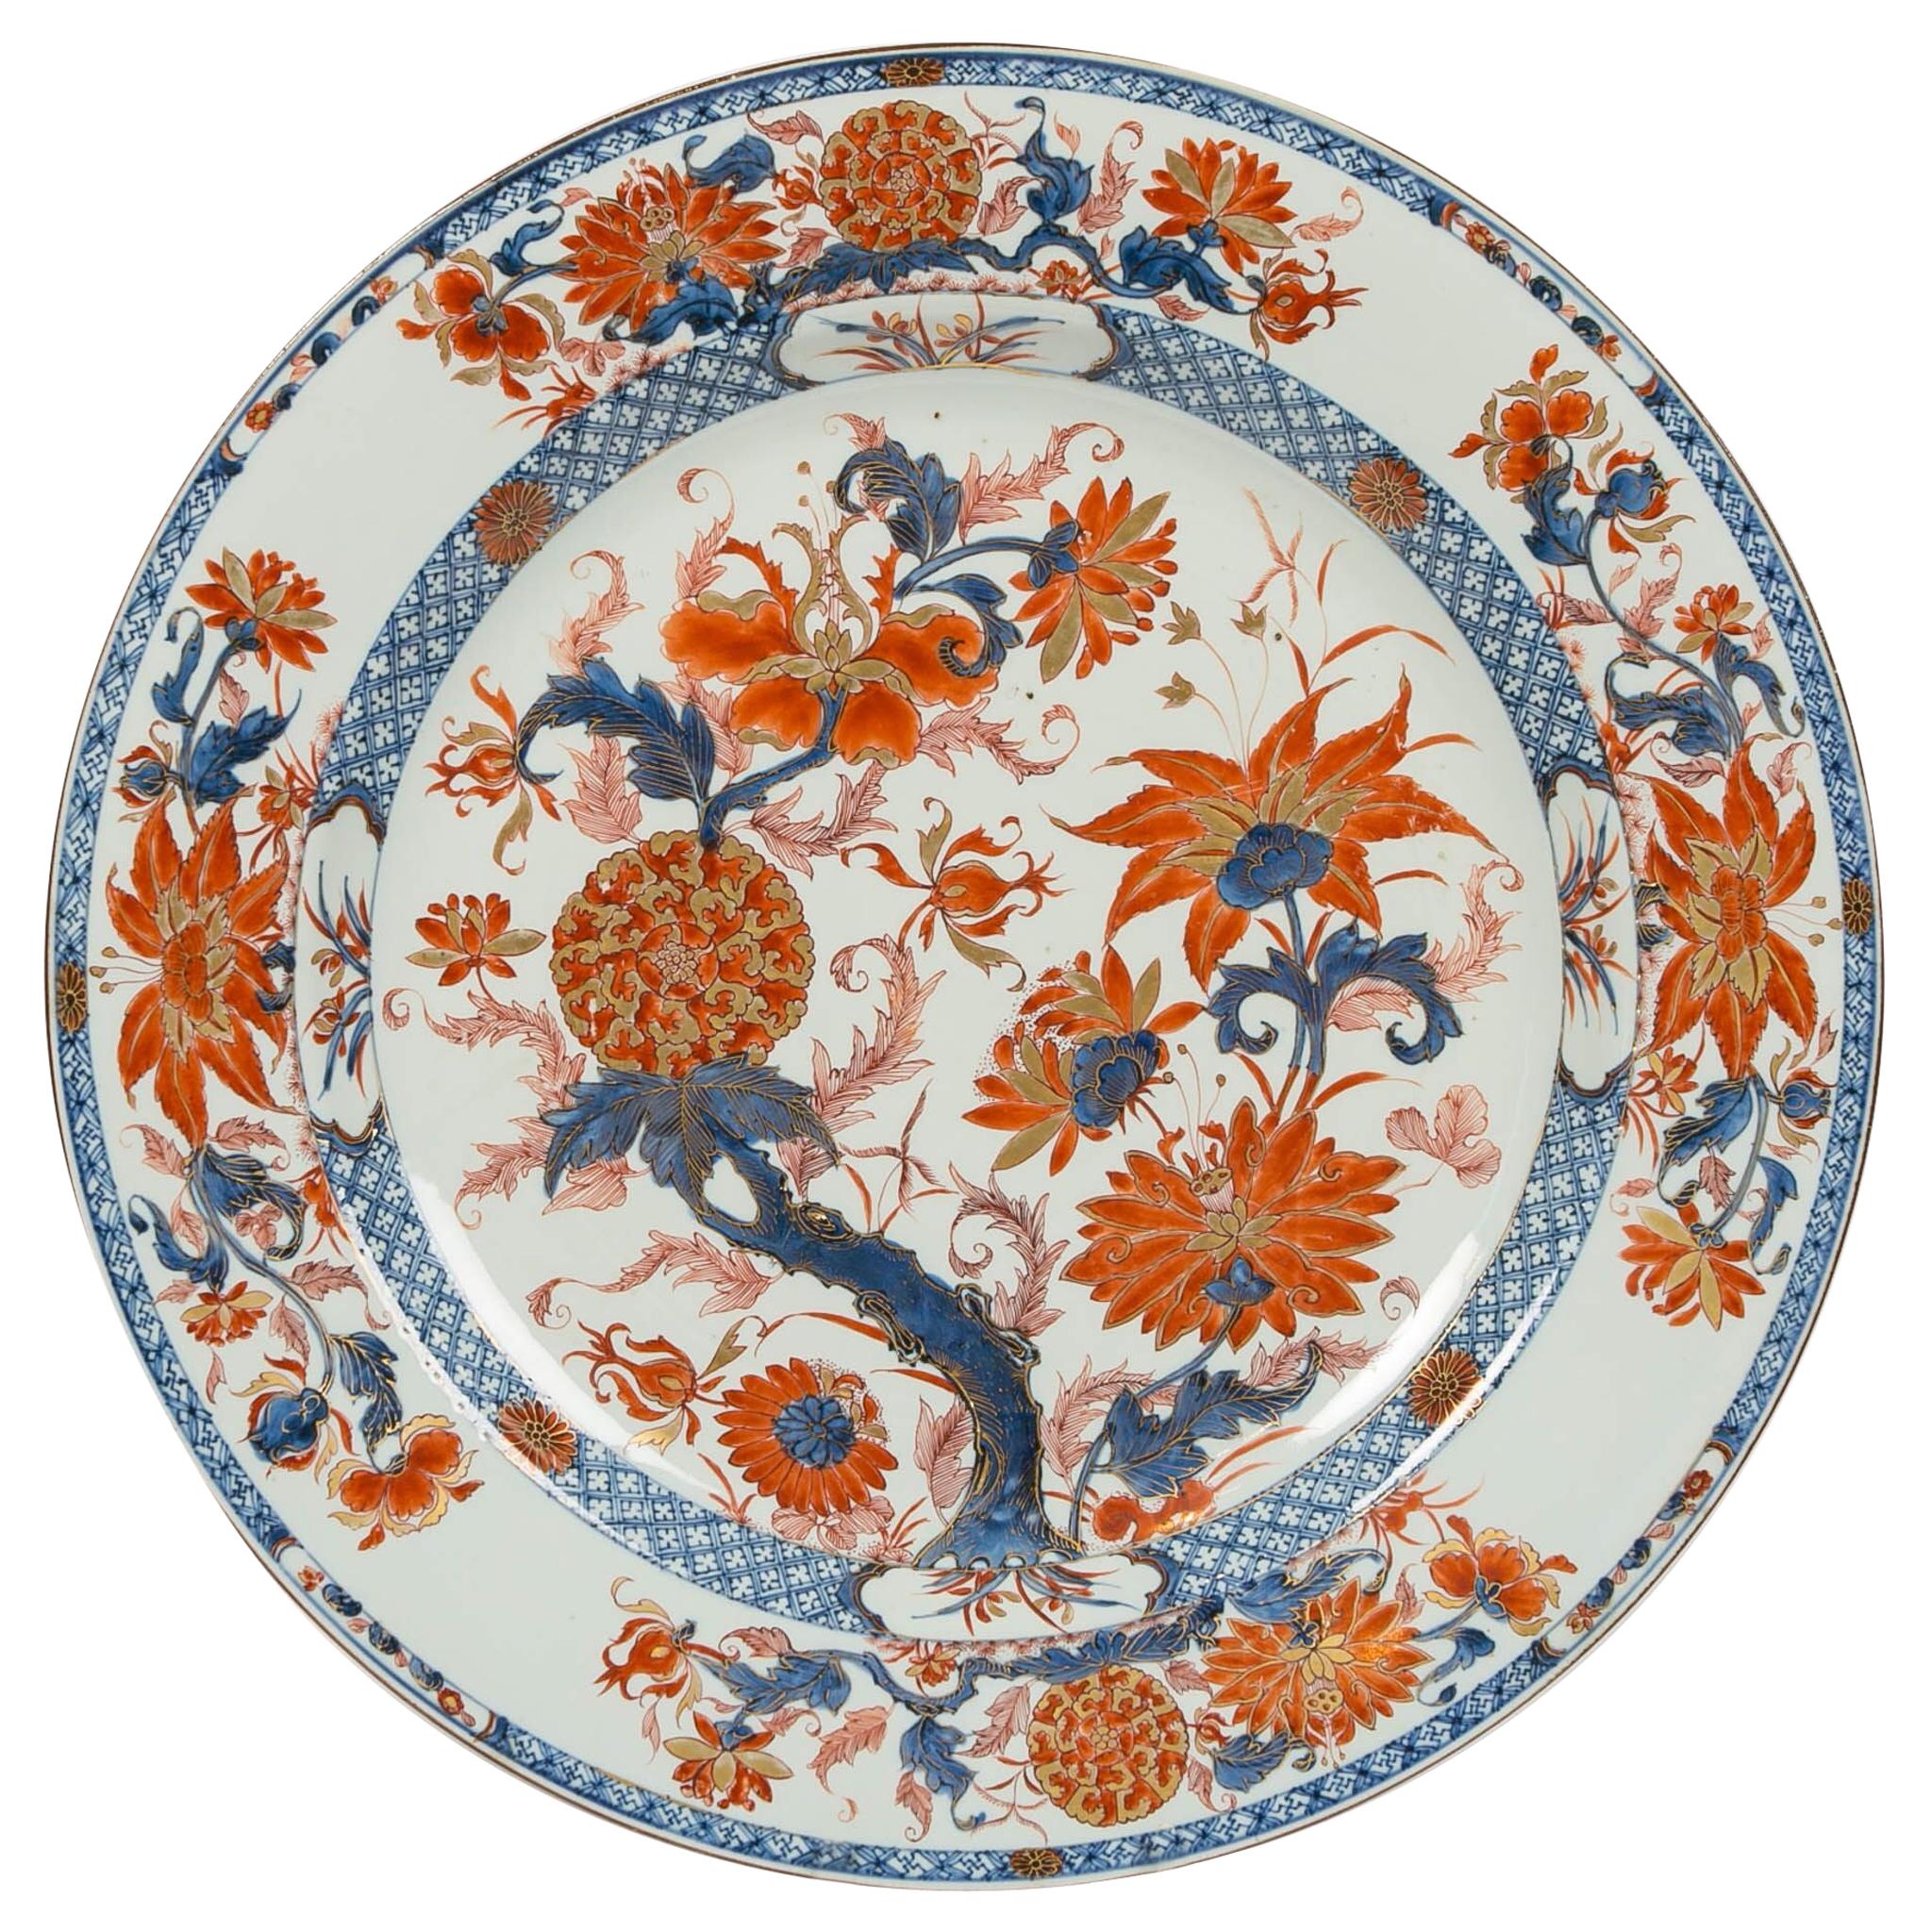 Antique Chinese Imari Charger with Floral Decoration